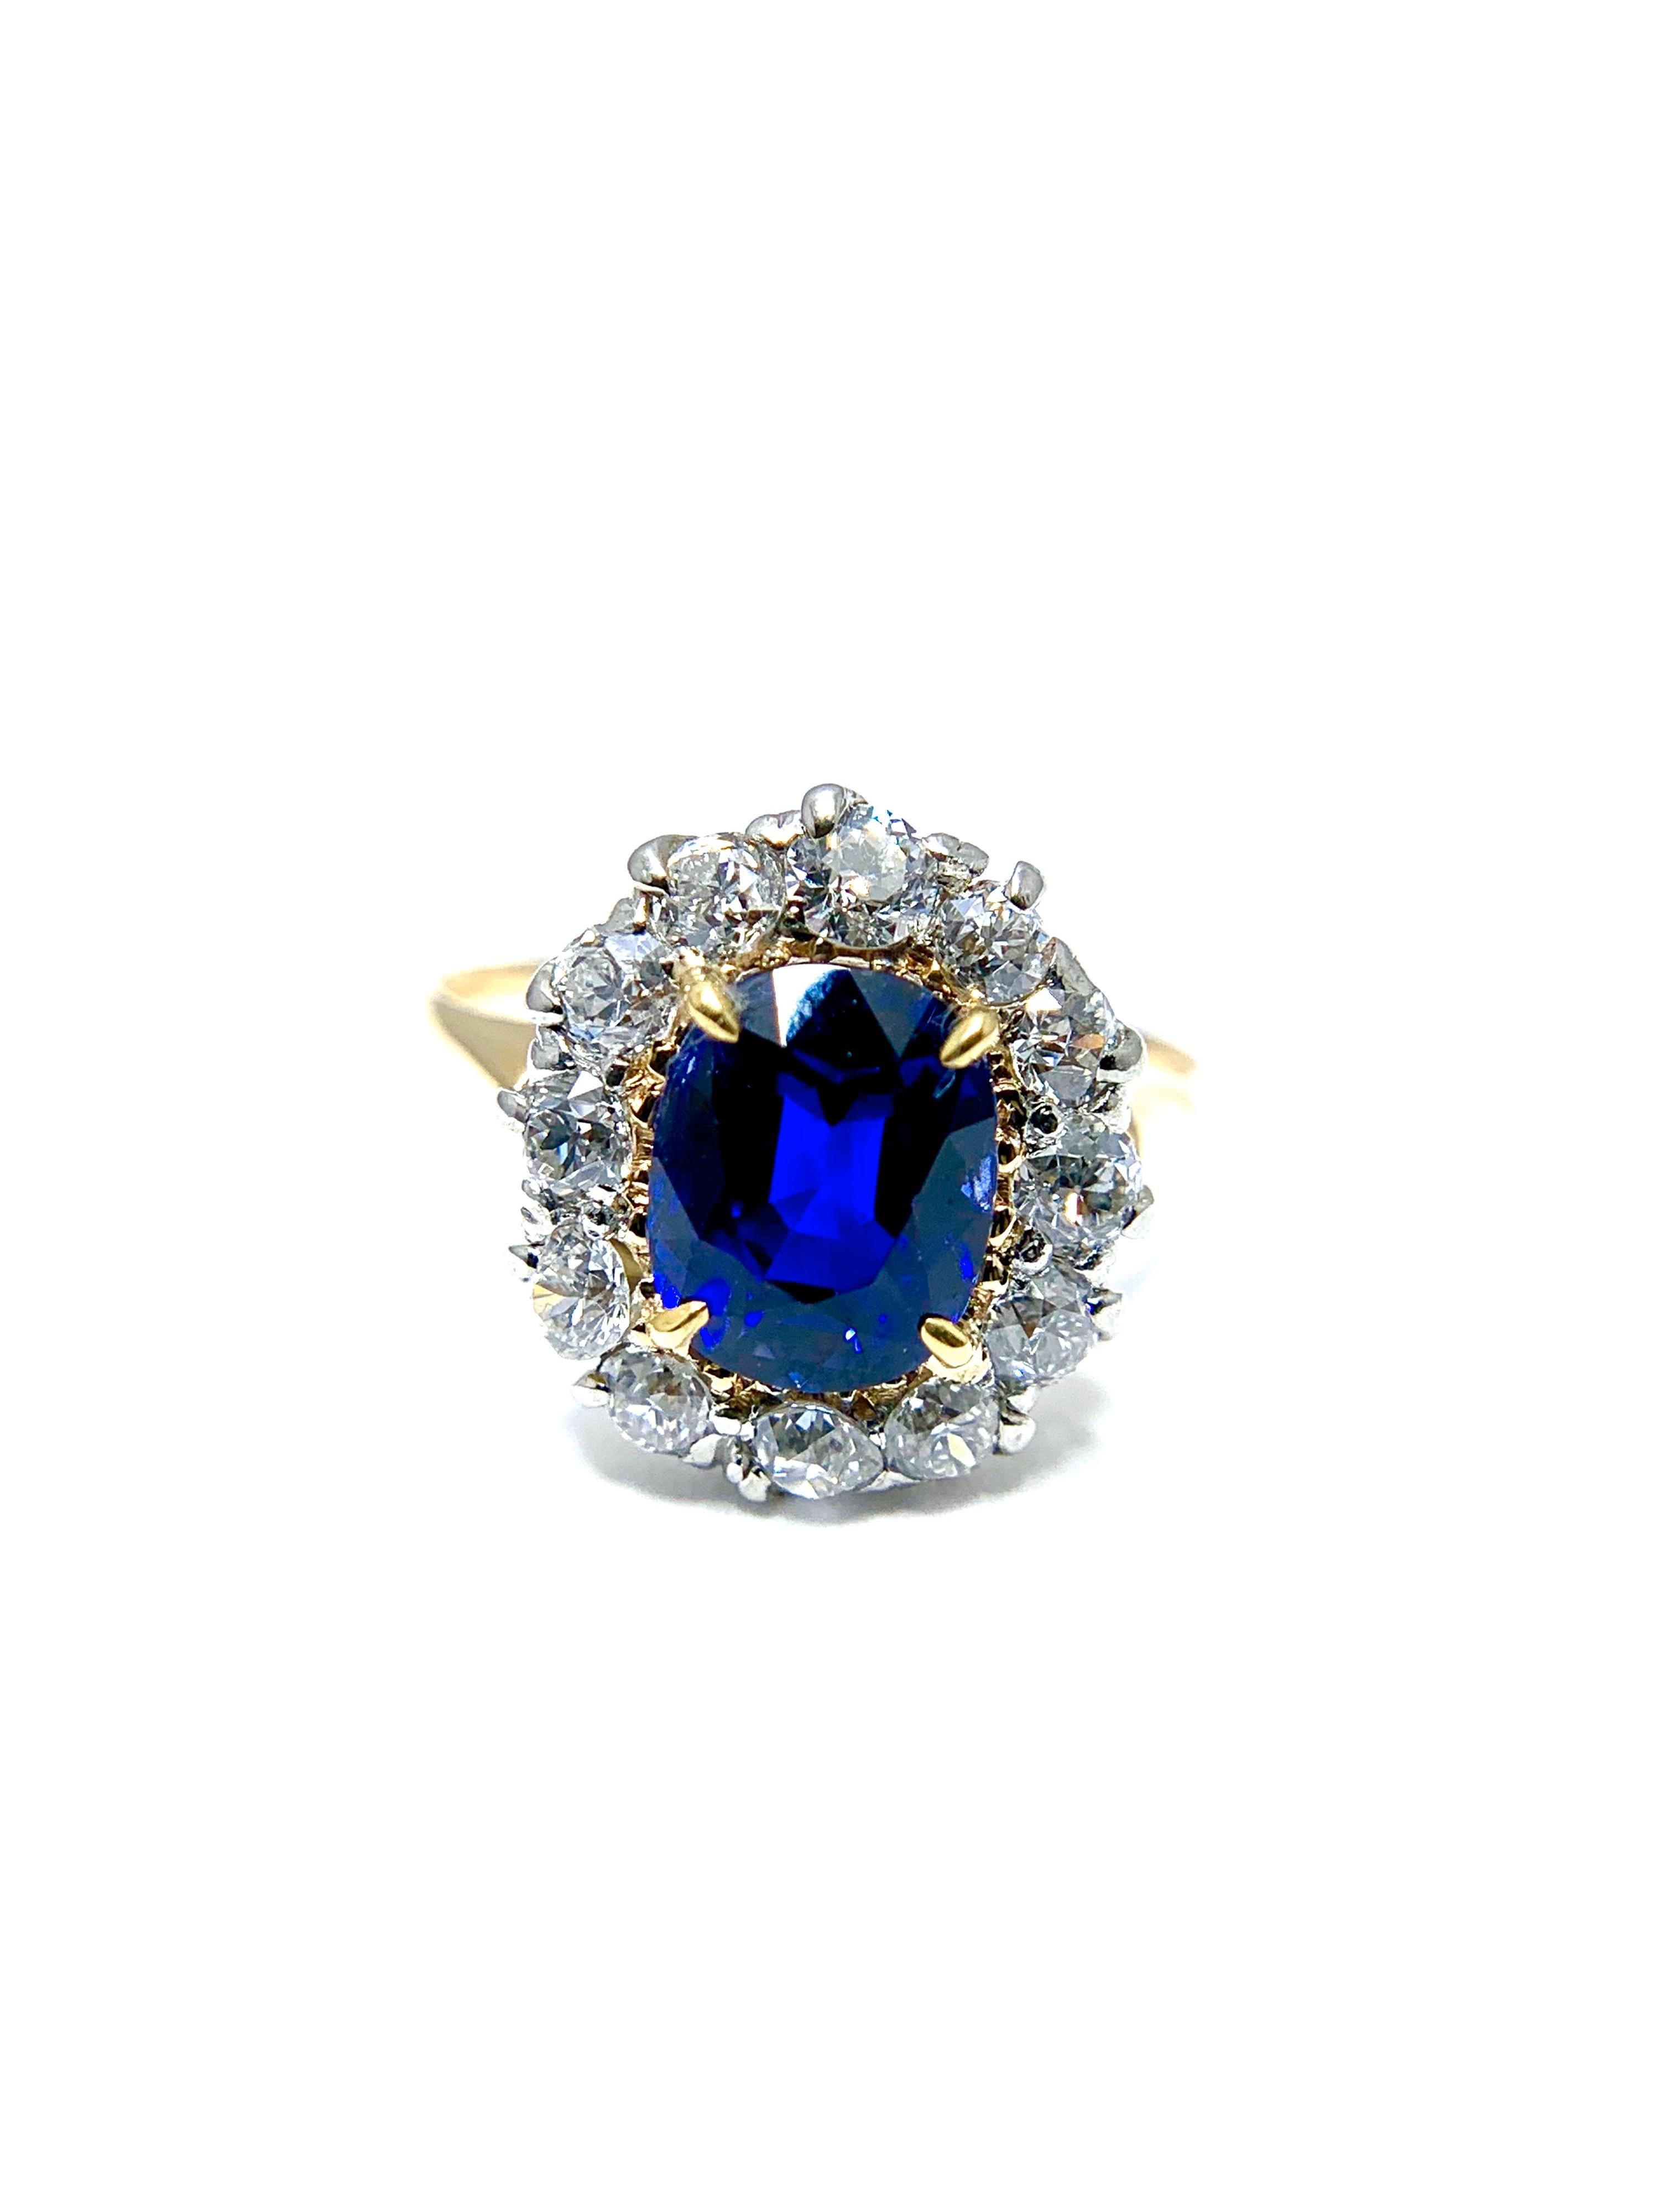 A stunning Egyptian blue oval Sapphire and Diamond ring!  The Sapphire is a natural no enhancement 2.63 carat beauty, surrounded by a single row of round brilliant Diamonds totaling 1.00 carat.  The Diamonds are set in platinum, with the sapphire